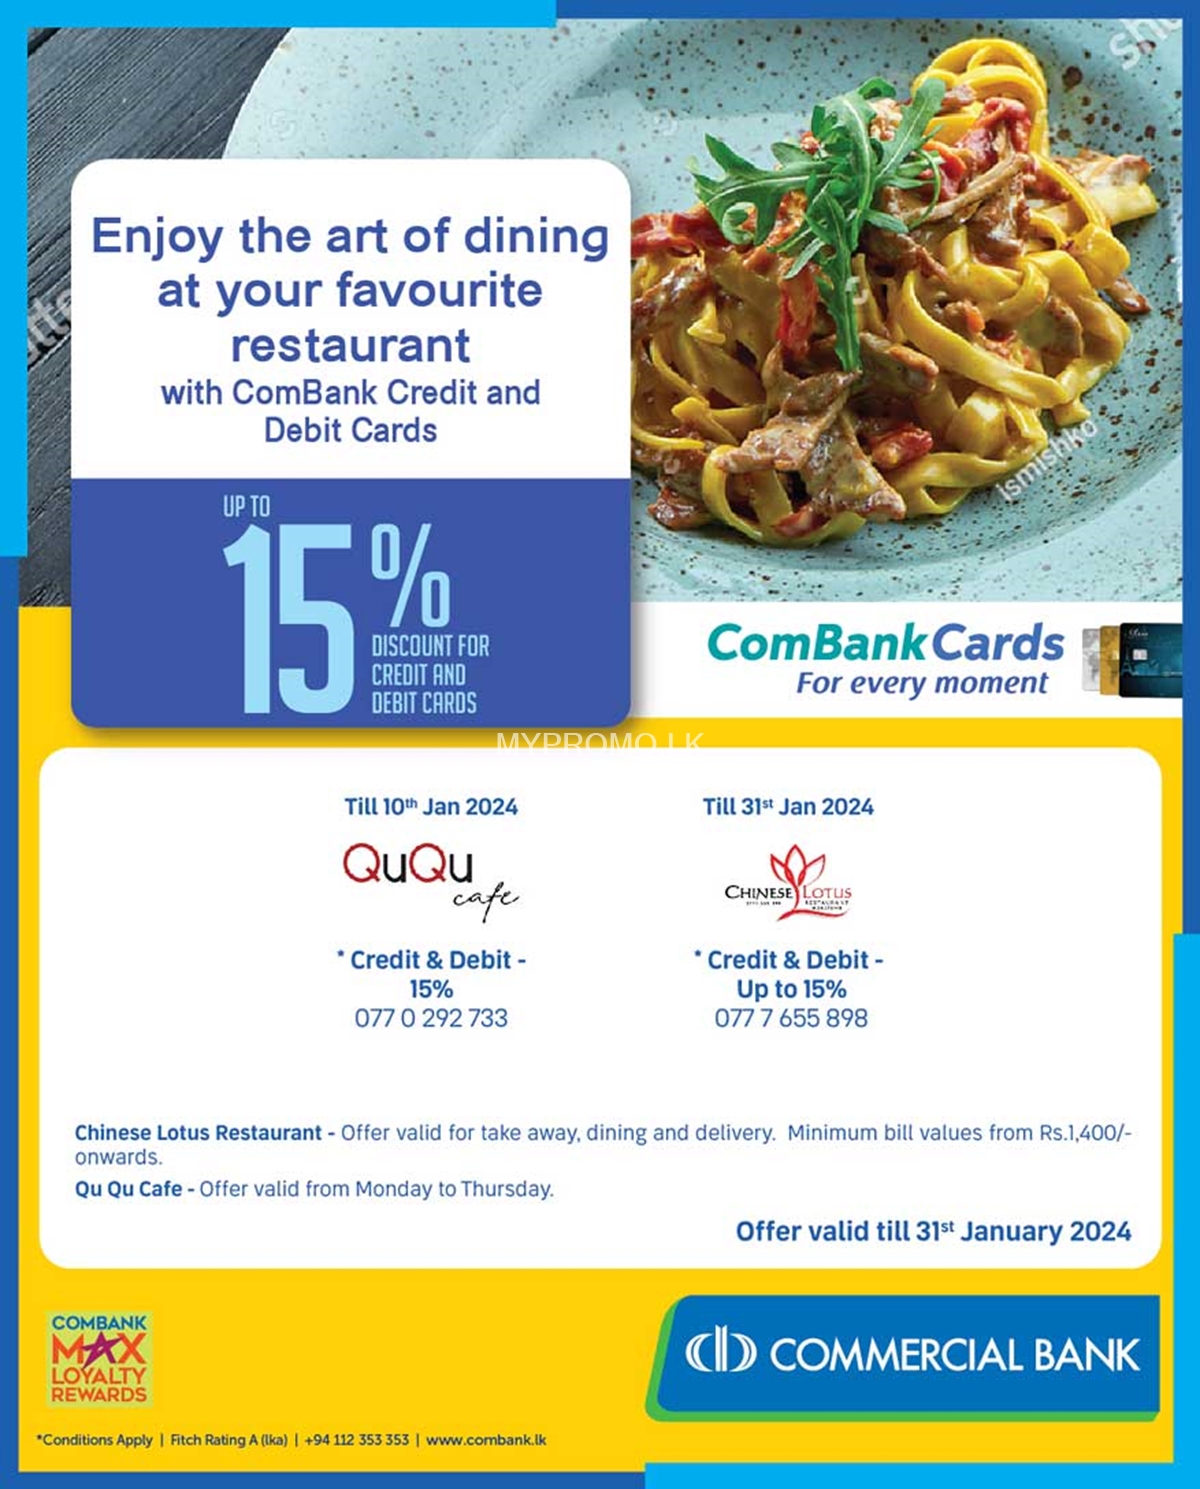 Dining at your favourite restaurant with Commercial Bank Credit and Debit Cards 